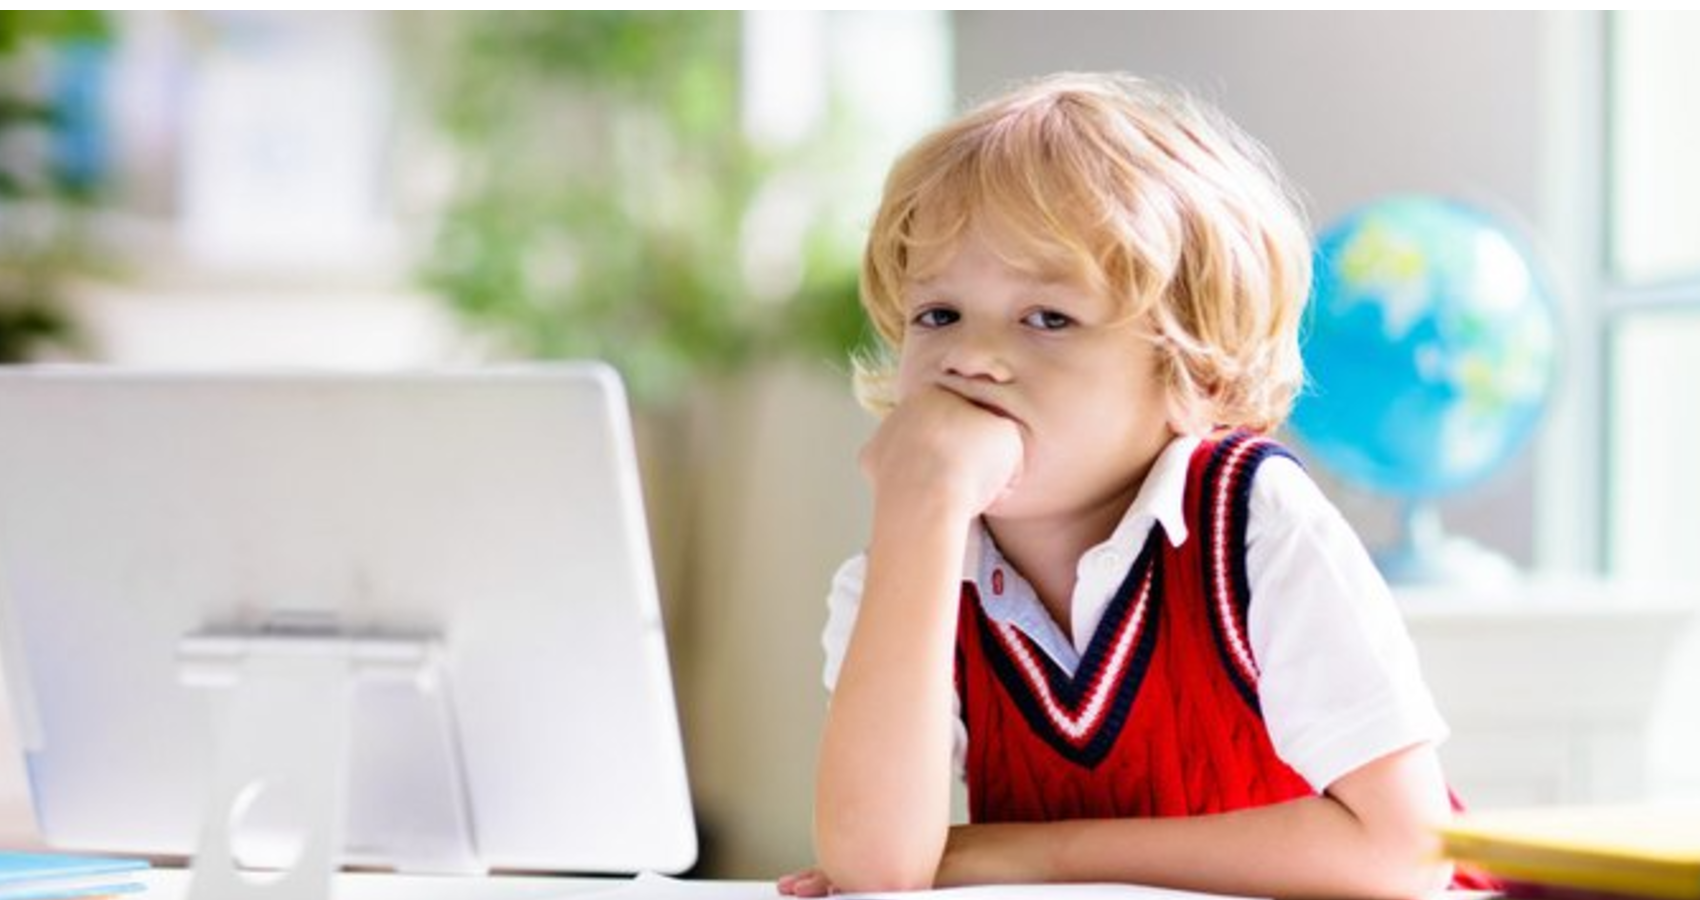 A child sitting on front of a computer